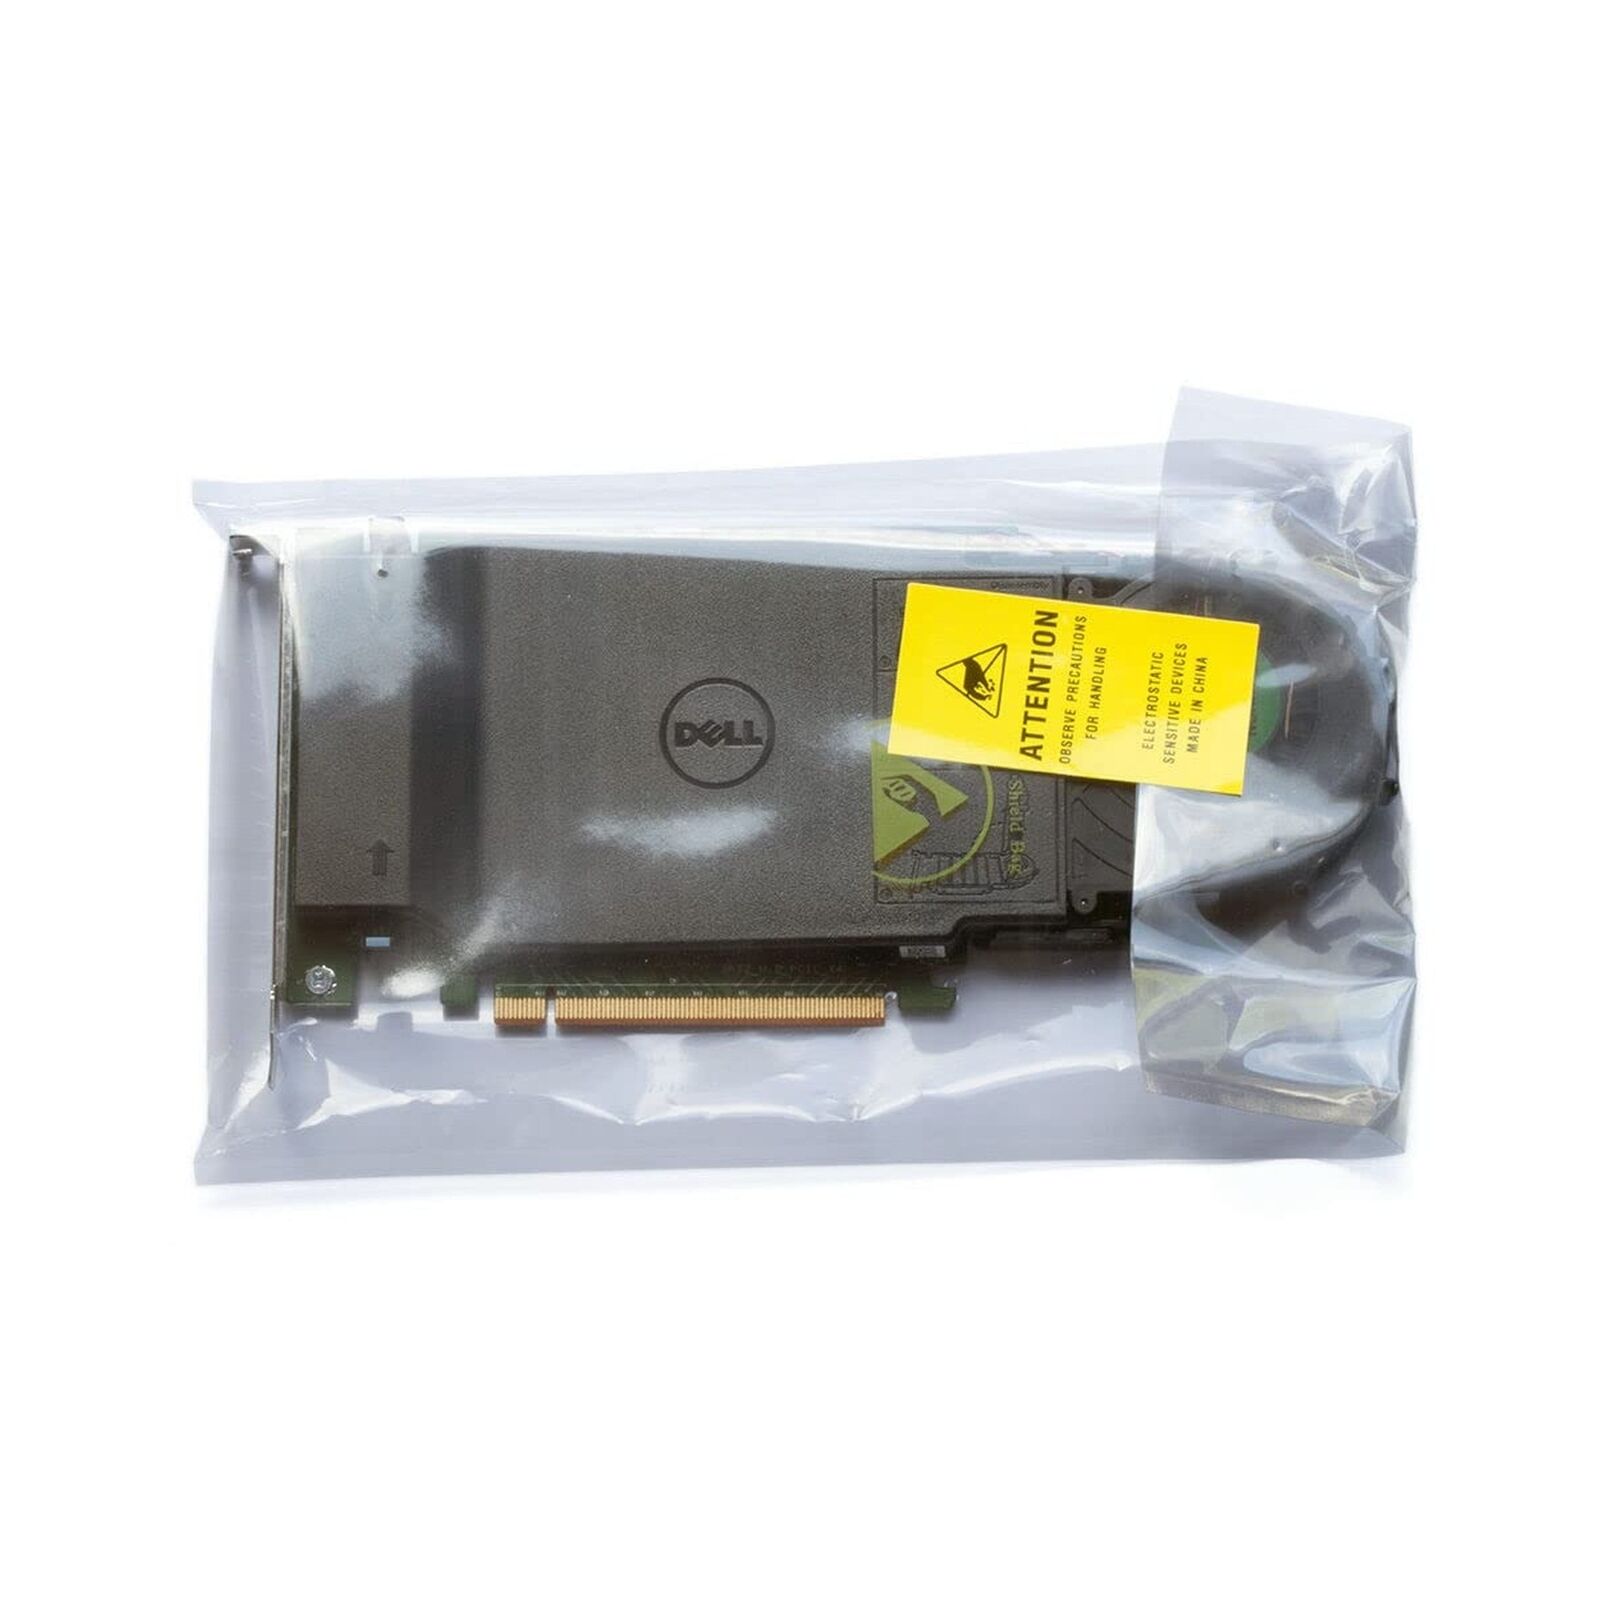 Dell Ultra-Speed Drive Quad NVMe M.2 PCIe x16 SSD Advanced Card with Thermal ...